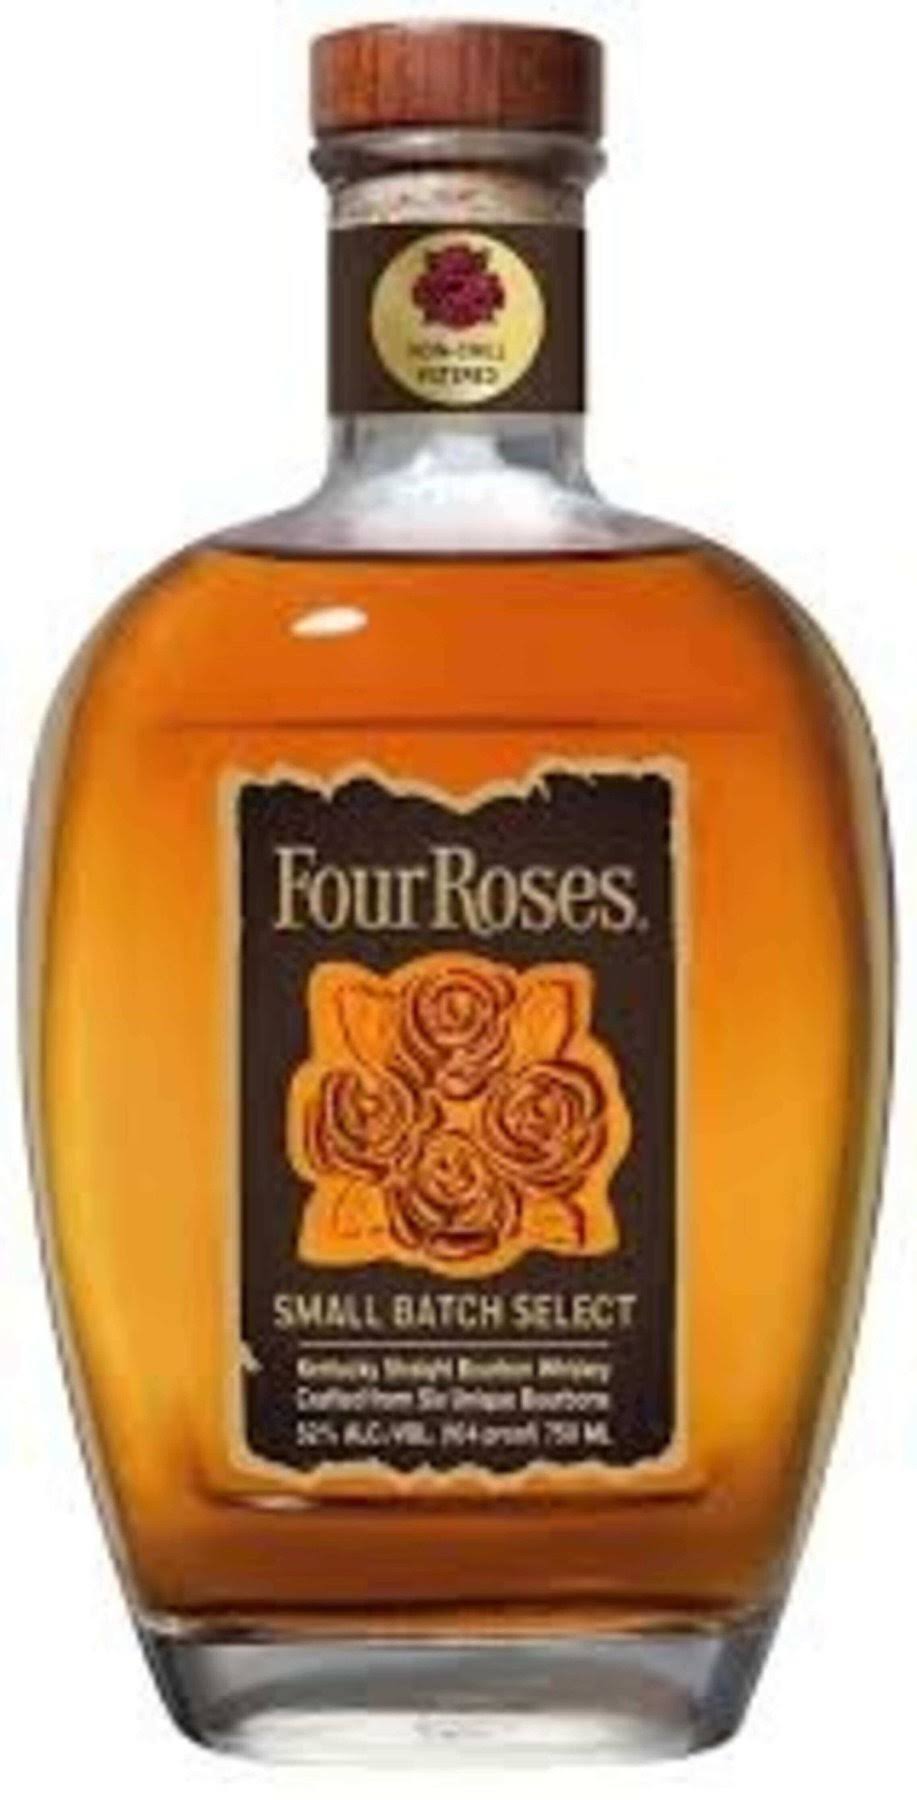 Four Roses Small Batch Select Bourbon Whiskey | ABV 52% 75cl